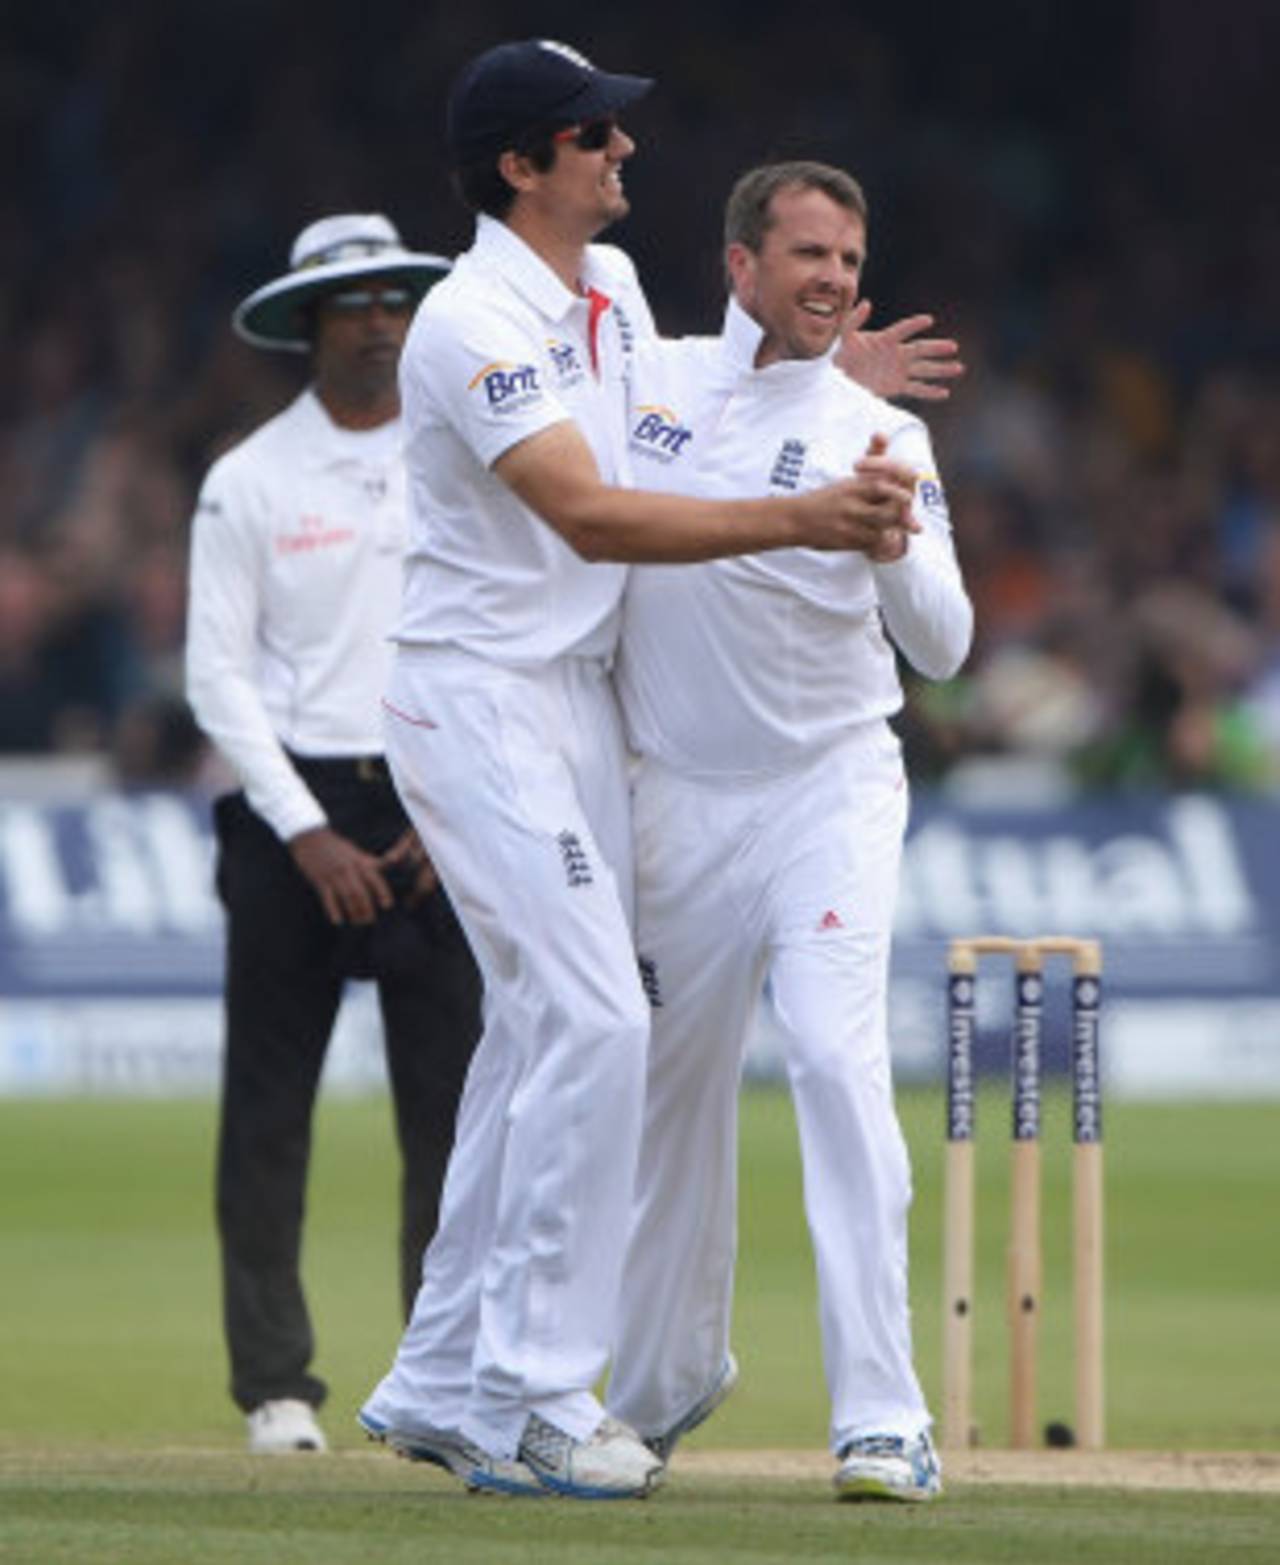 Graeme Swann was soon into the wickets, England v Australia, 2nd Investec Test, Lord's, 4th day, July 21, 2013